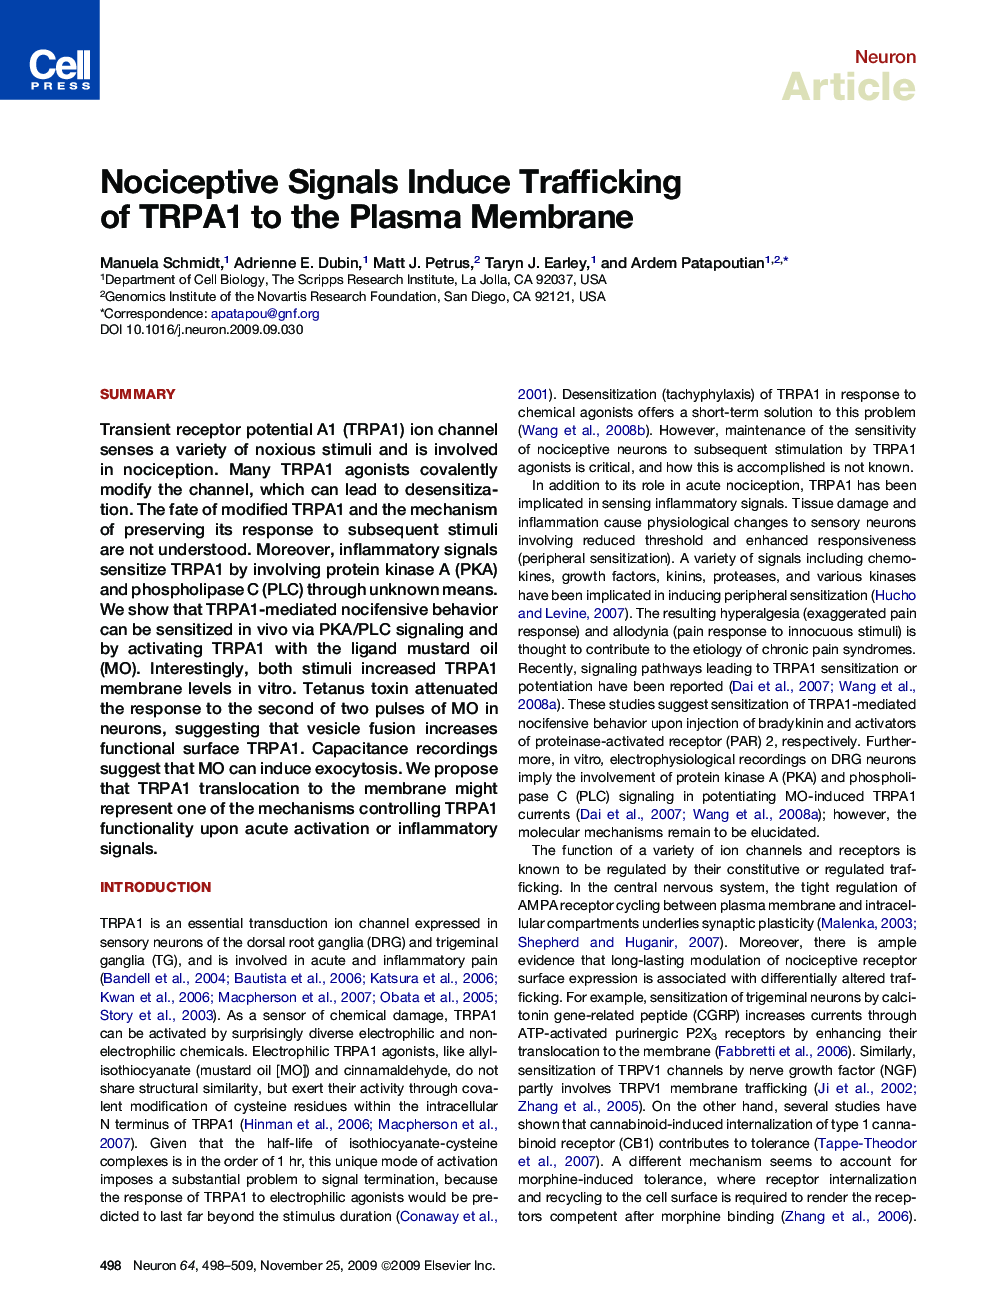 Nociceptive Signals Induce Trafficking of TRPA1 to the Plasma Membrane